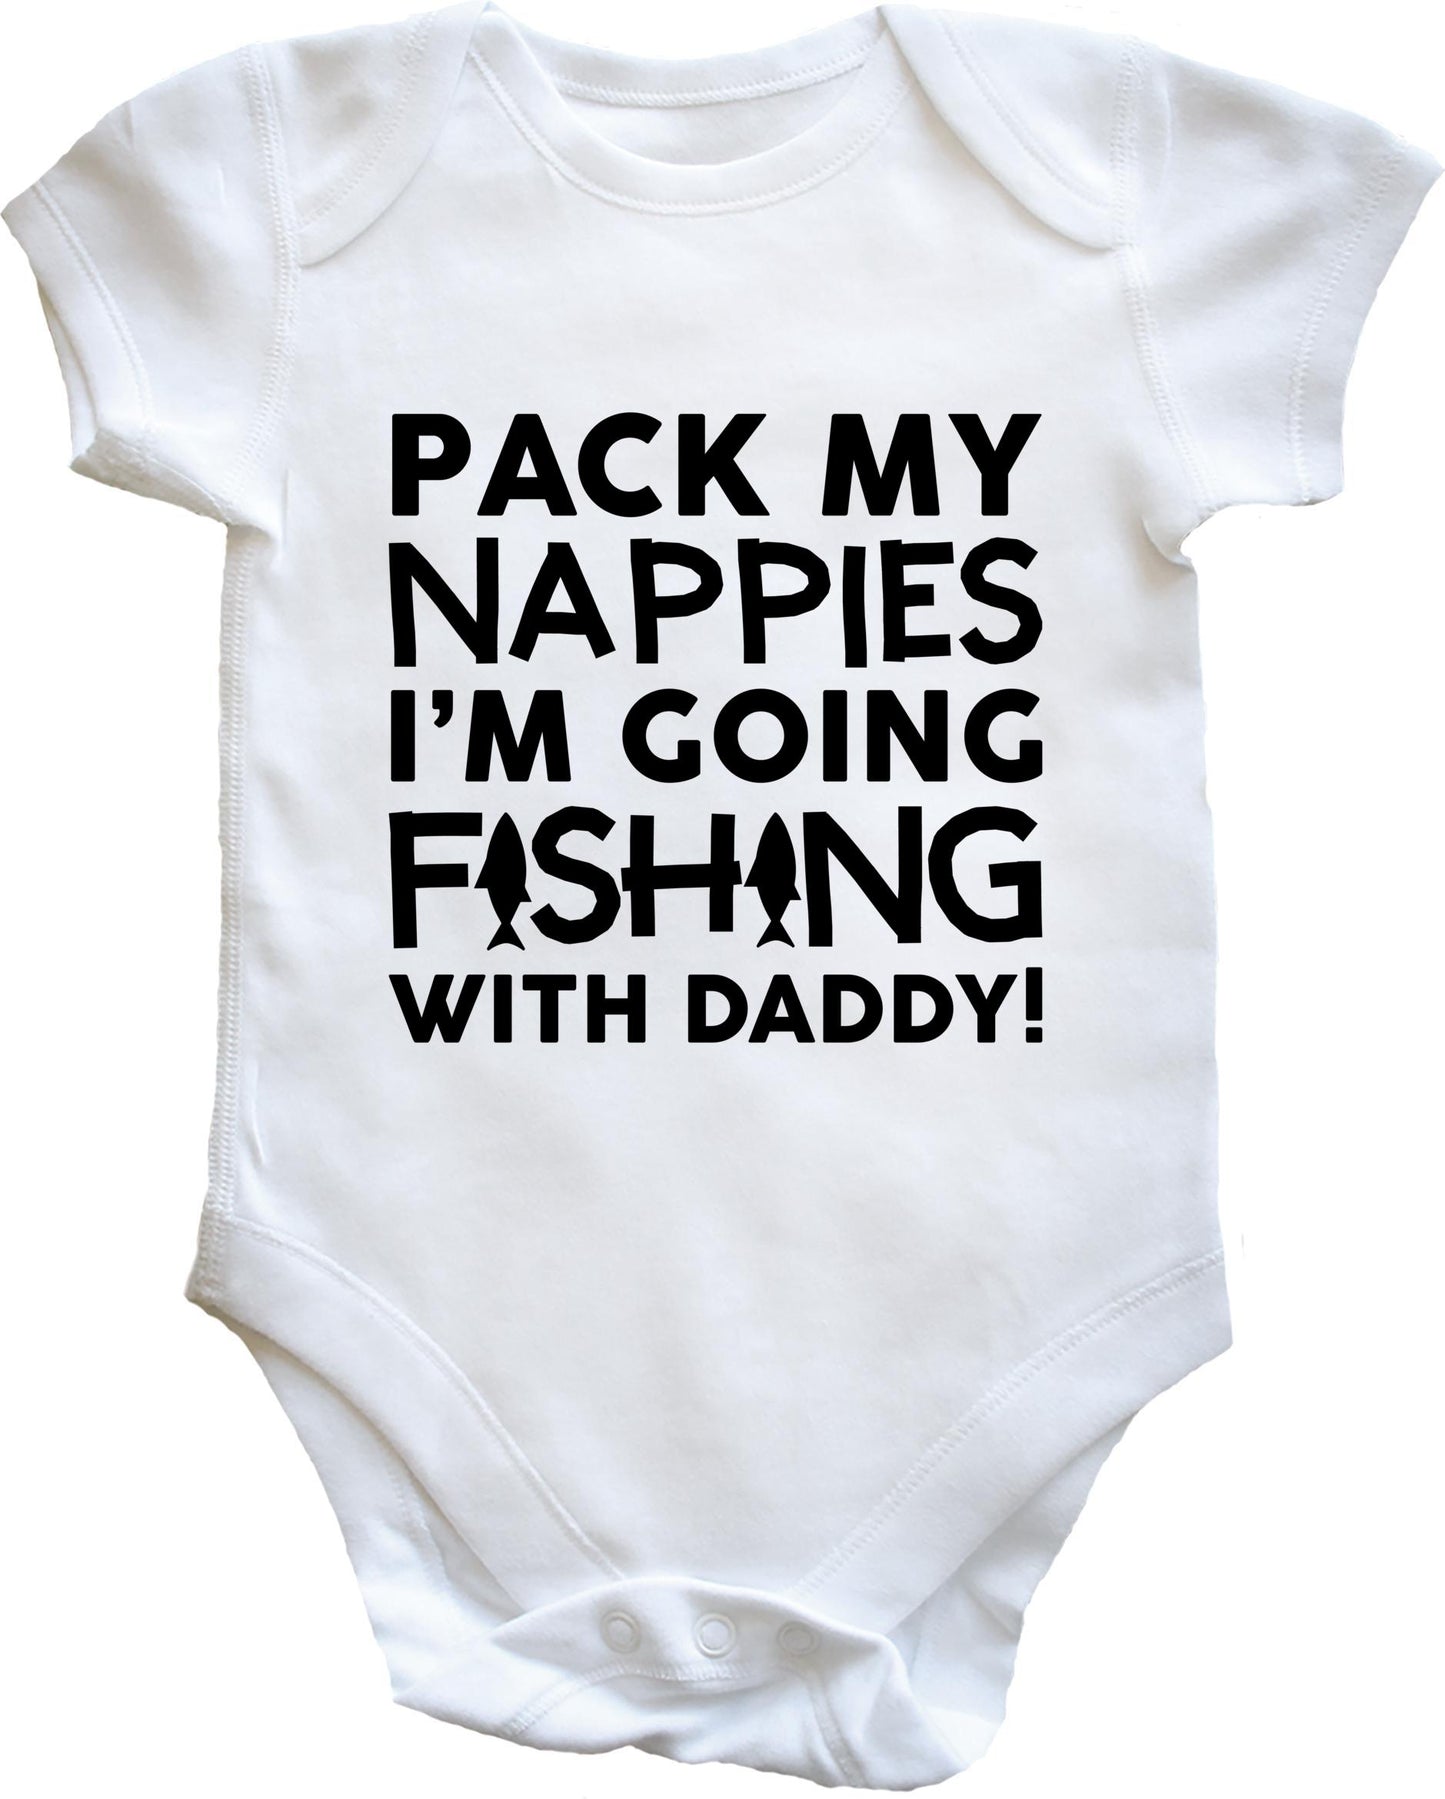 Pack my nappies I'm going fishing with daddy baby vest